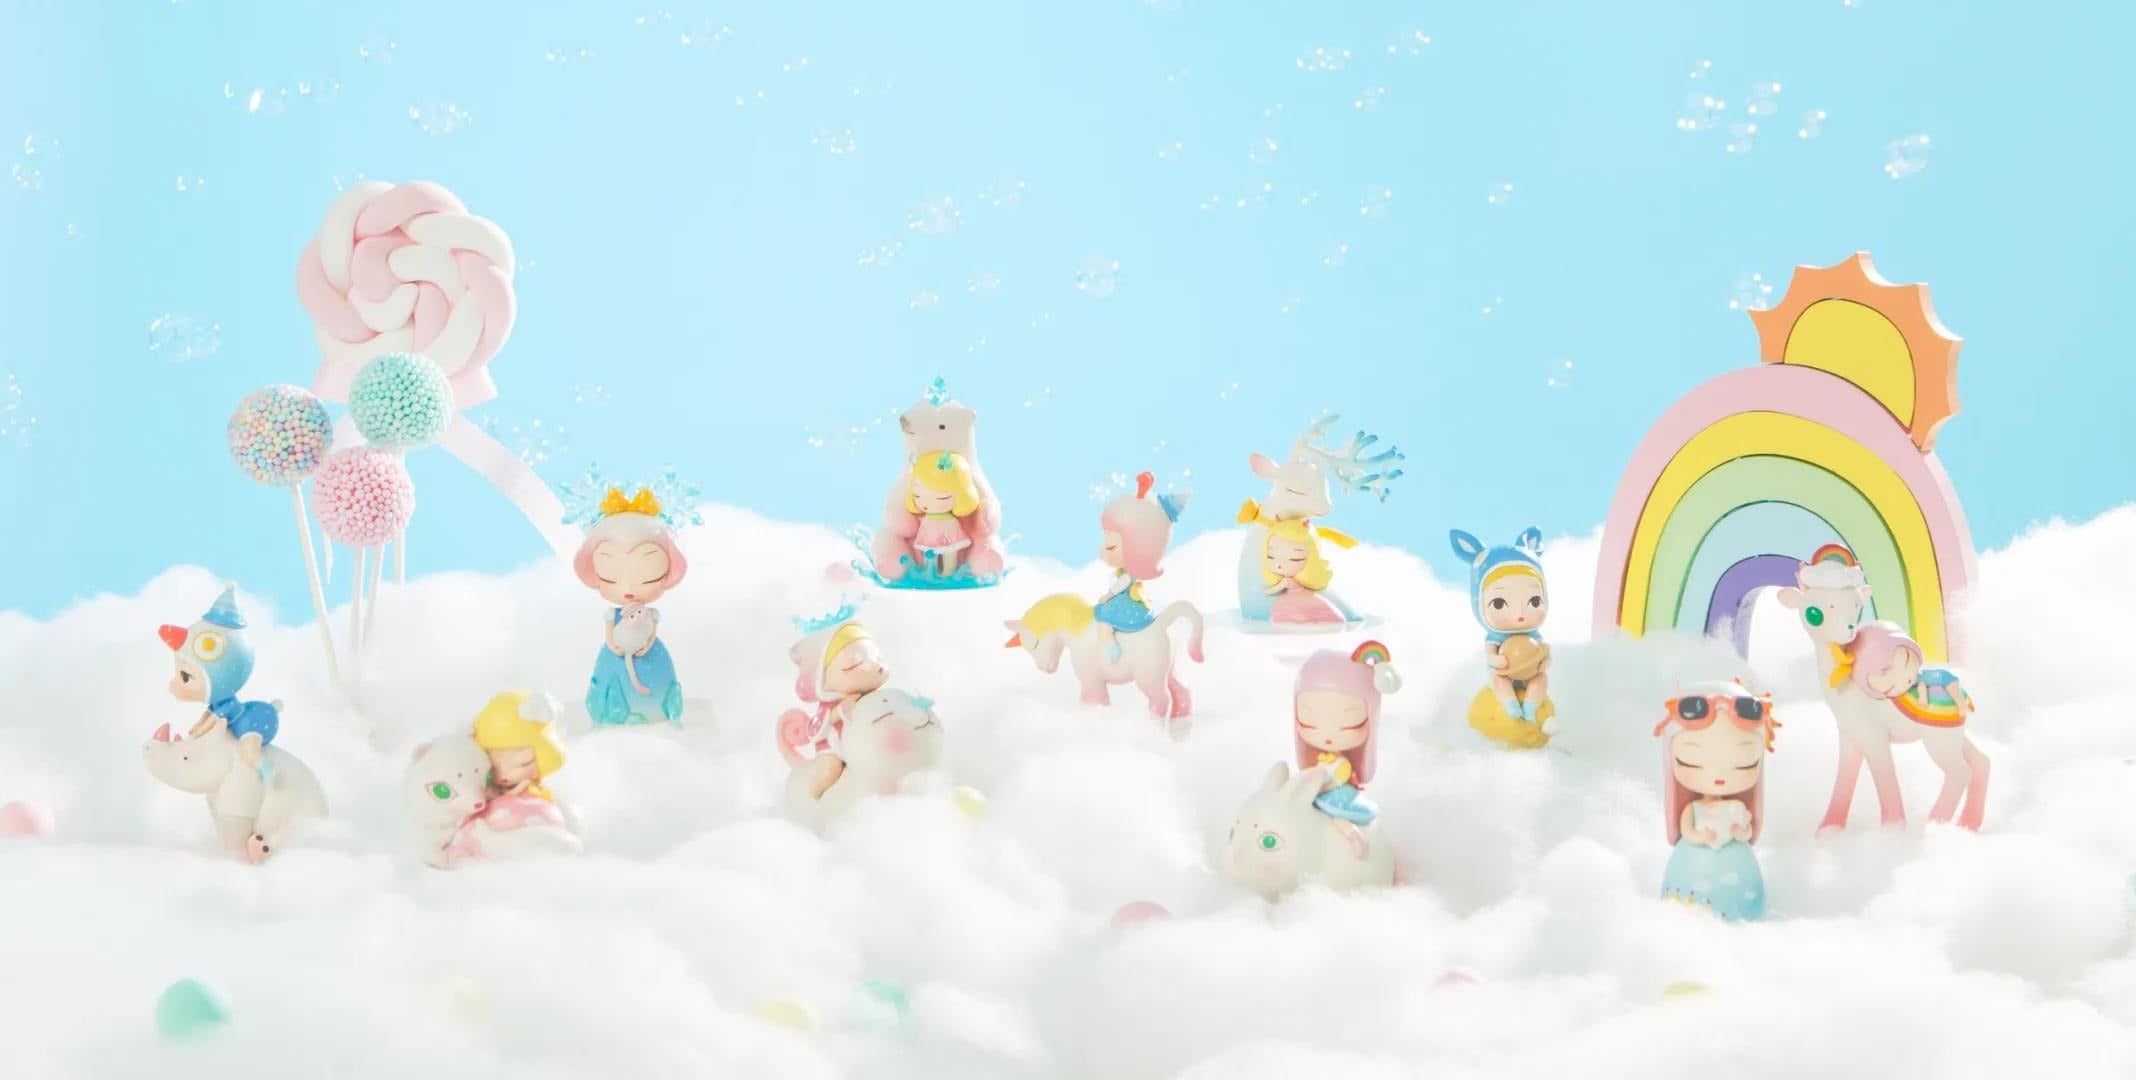 Weather Fairy Tales Blind Box series by Kemelife: Small figurines on a cloud with a rainbow, sheep, and toy animals.